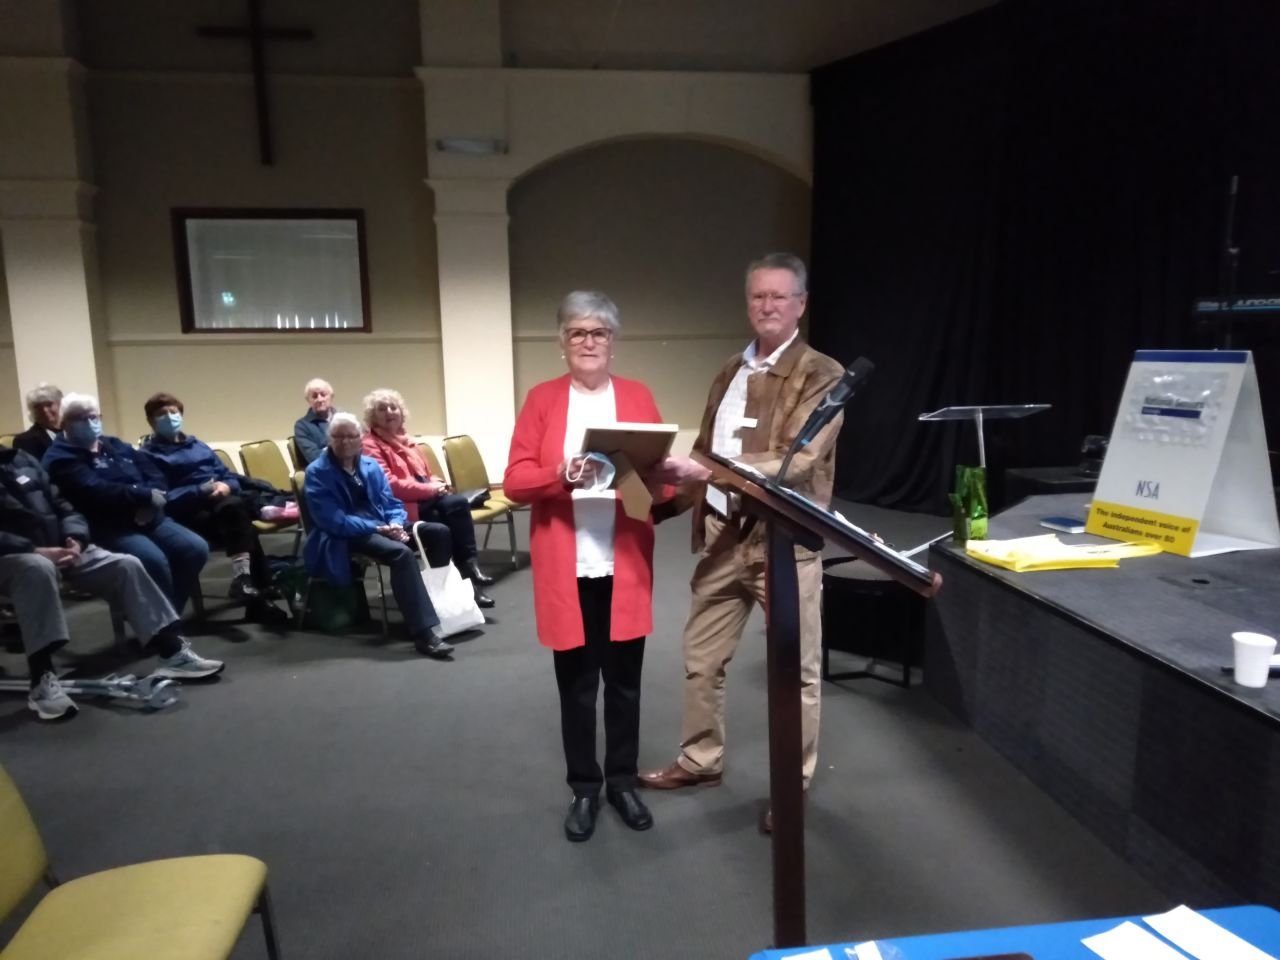 June Stevenson receiving the inaugural The Graeme Piggott Certificate of Appreciation for her long & dedicated work in the kitchen, from President Richard Arnold